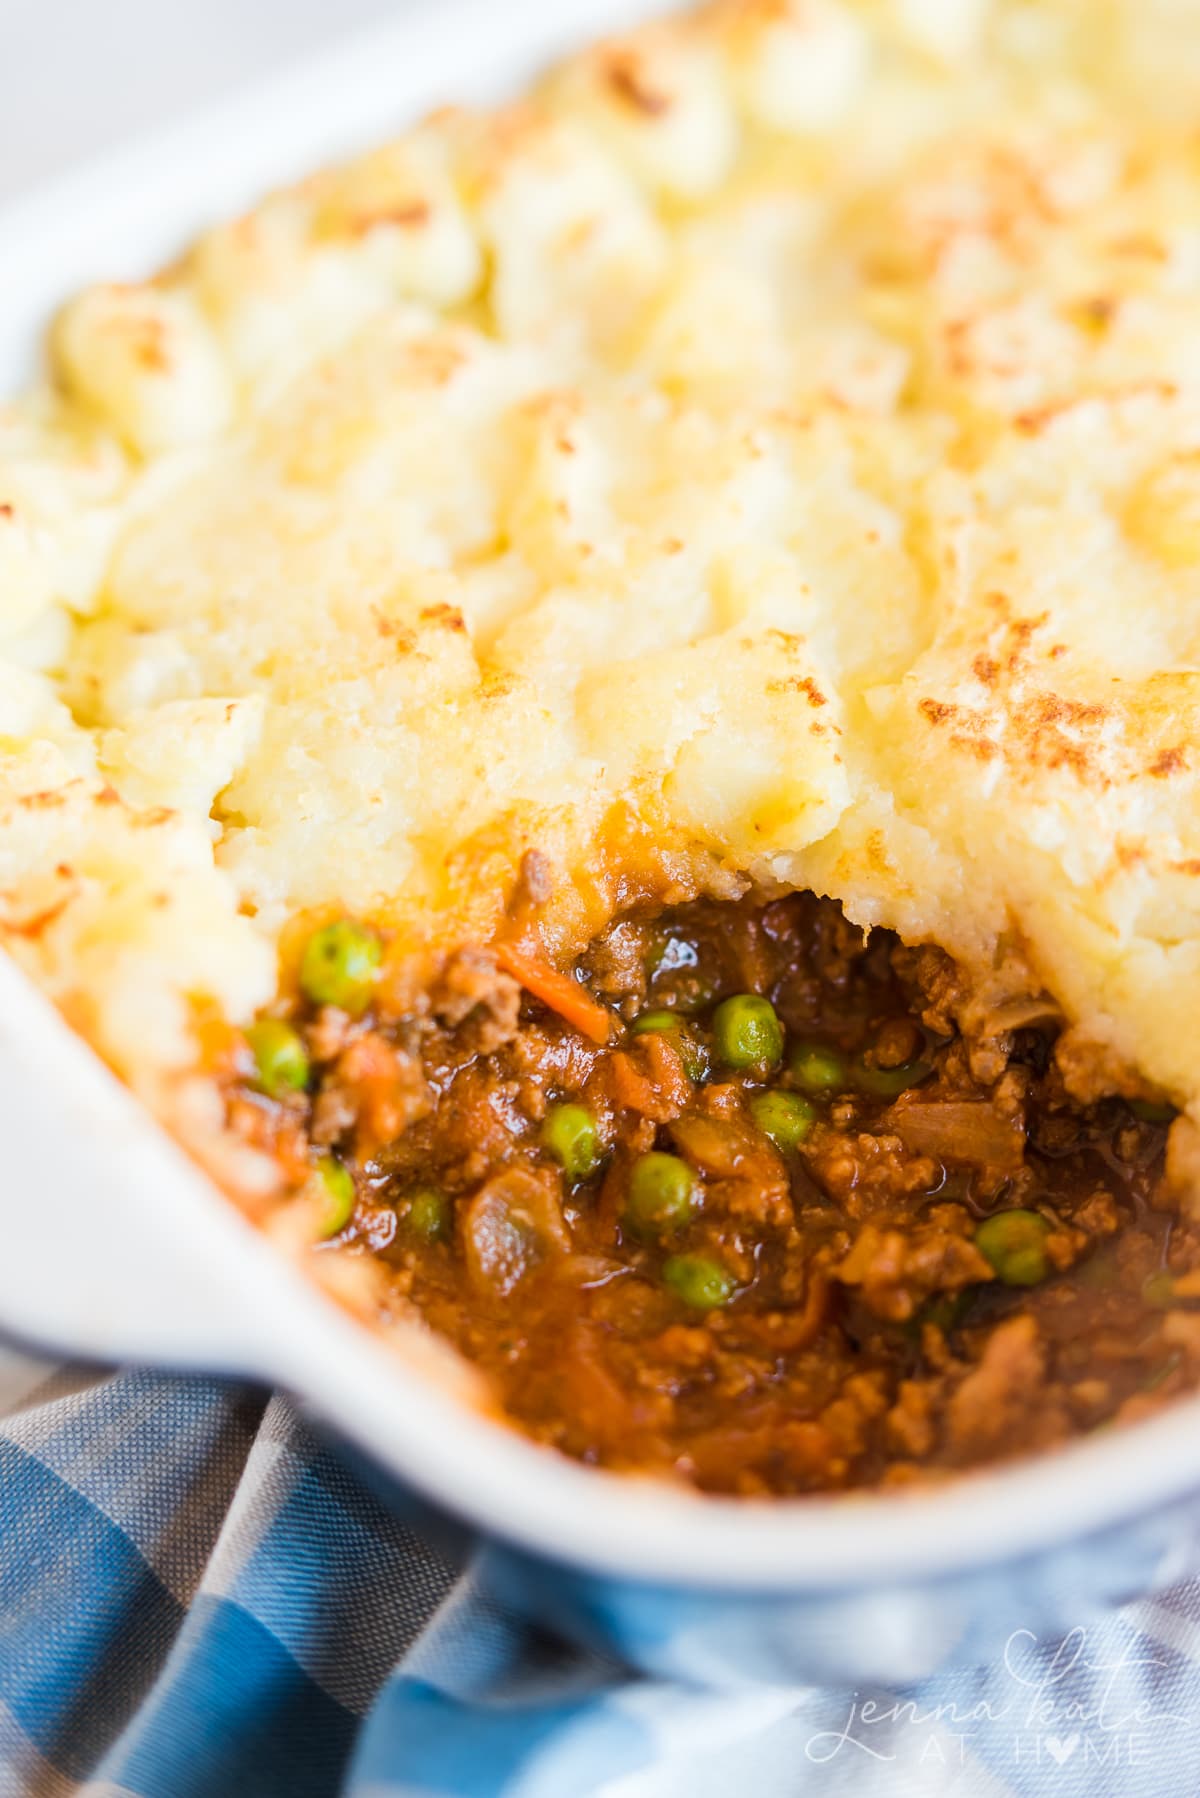 Close up of the meat filling in the shepherd's pie. Potato on top with sauce, ground beef, carrots and peas visible below.